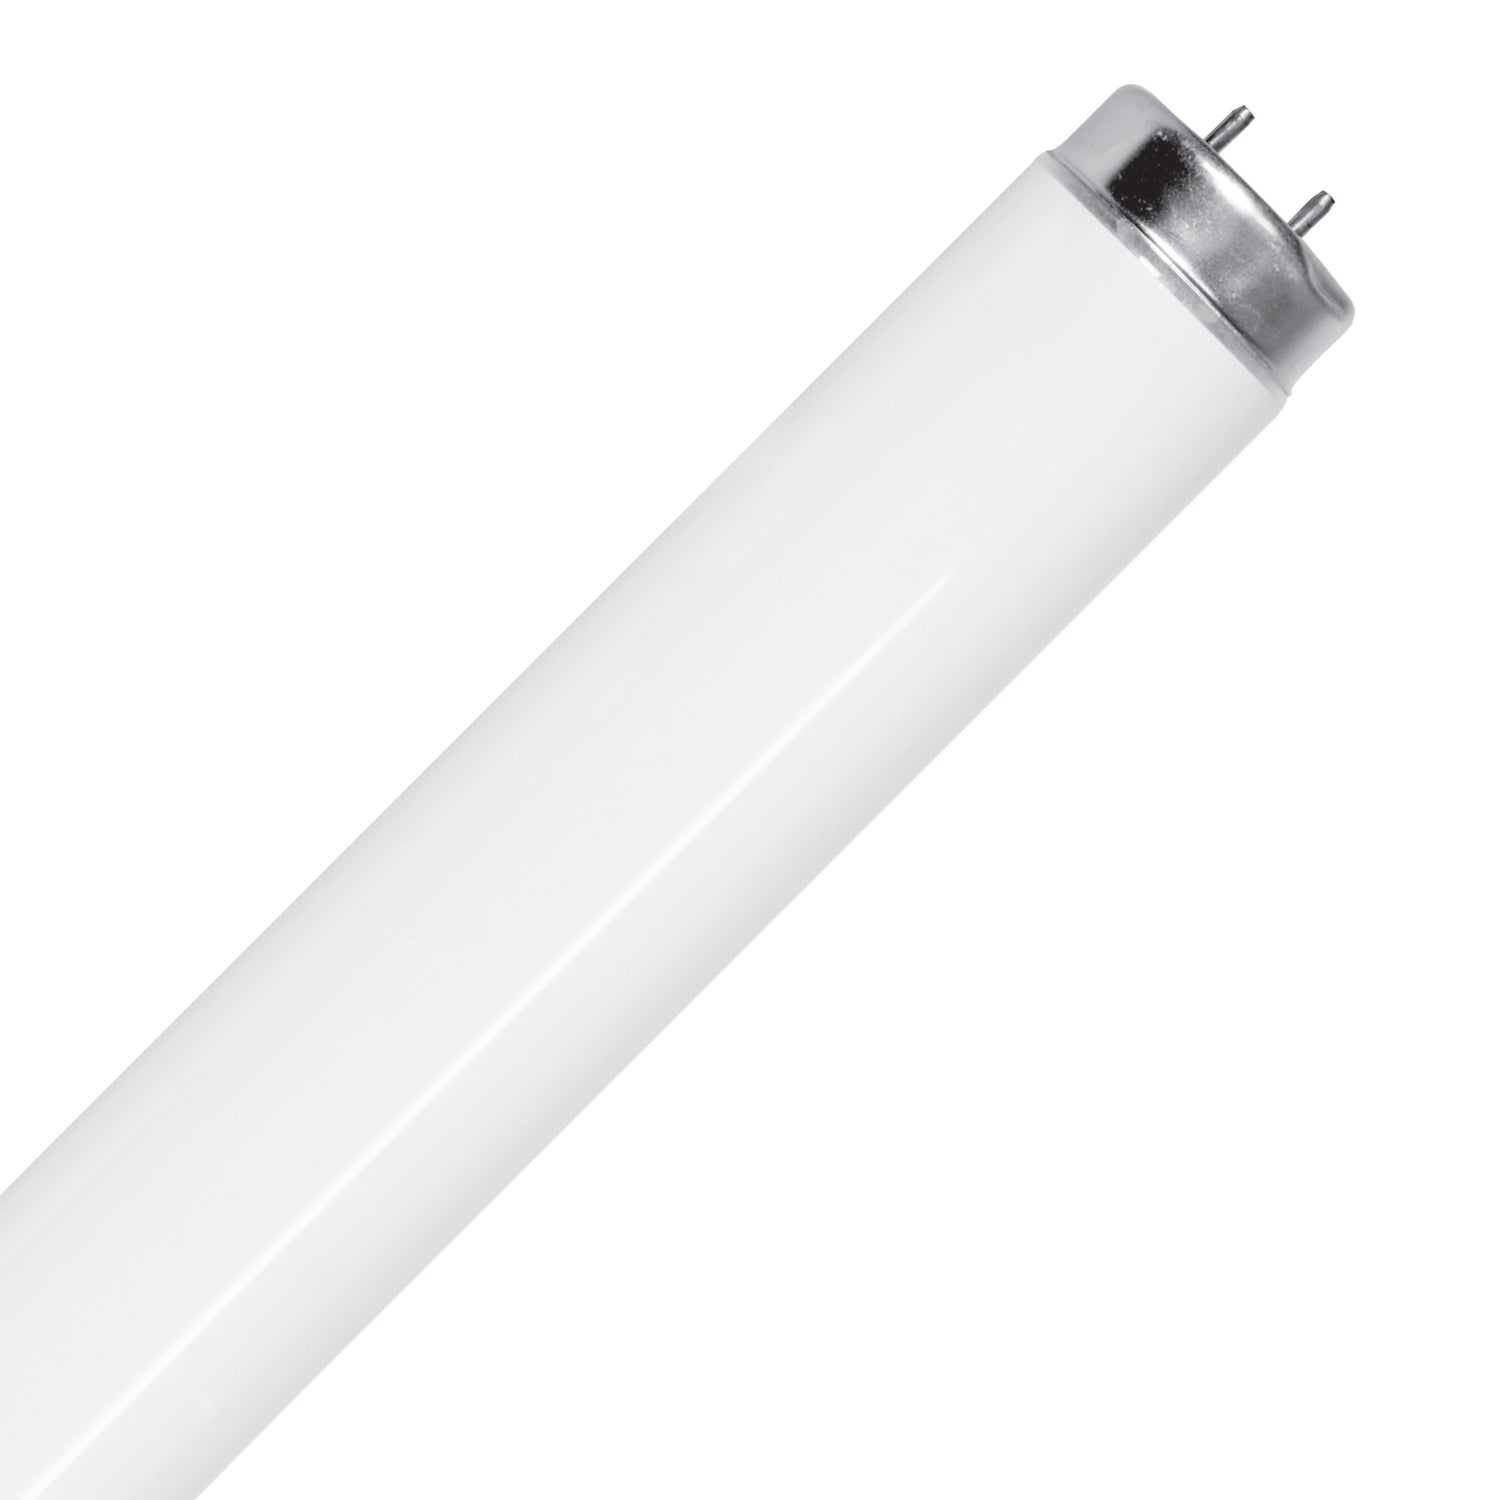 4 ft. 40W Daylight Deluxe (6500K) G13 Base (T12 Replacement) Fluorescent Linear Light Tube (2-Pack)